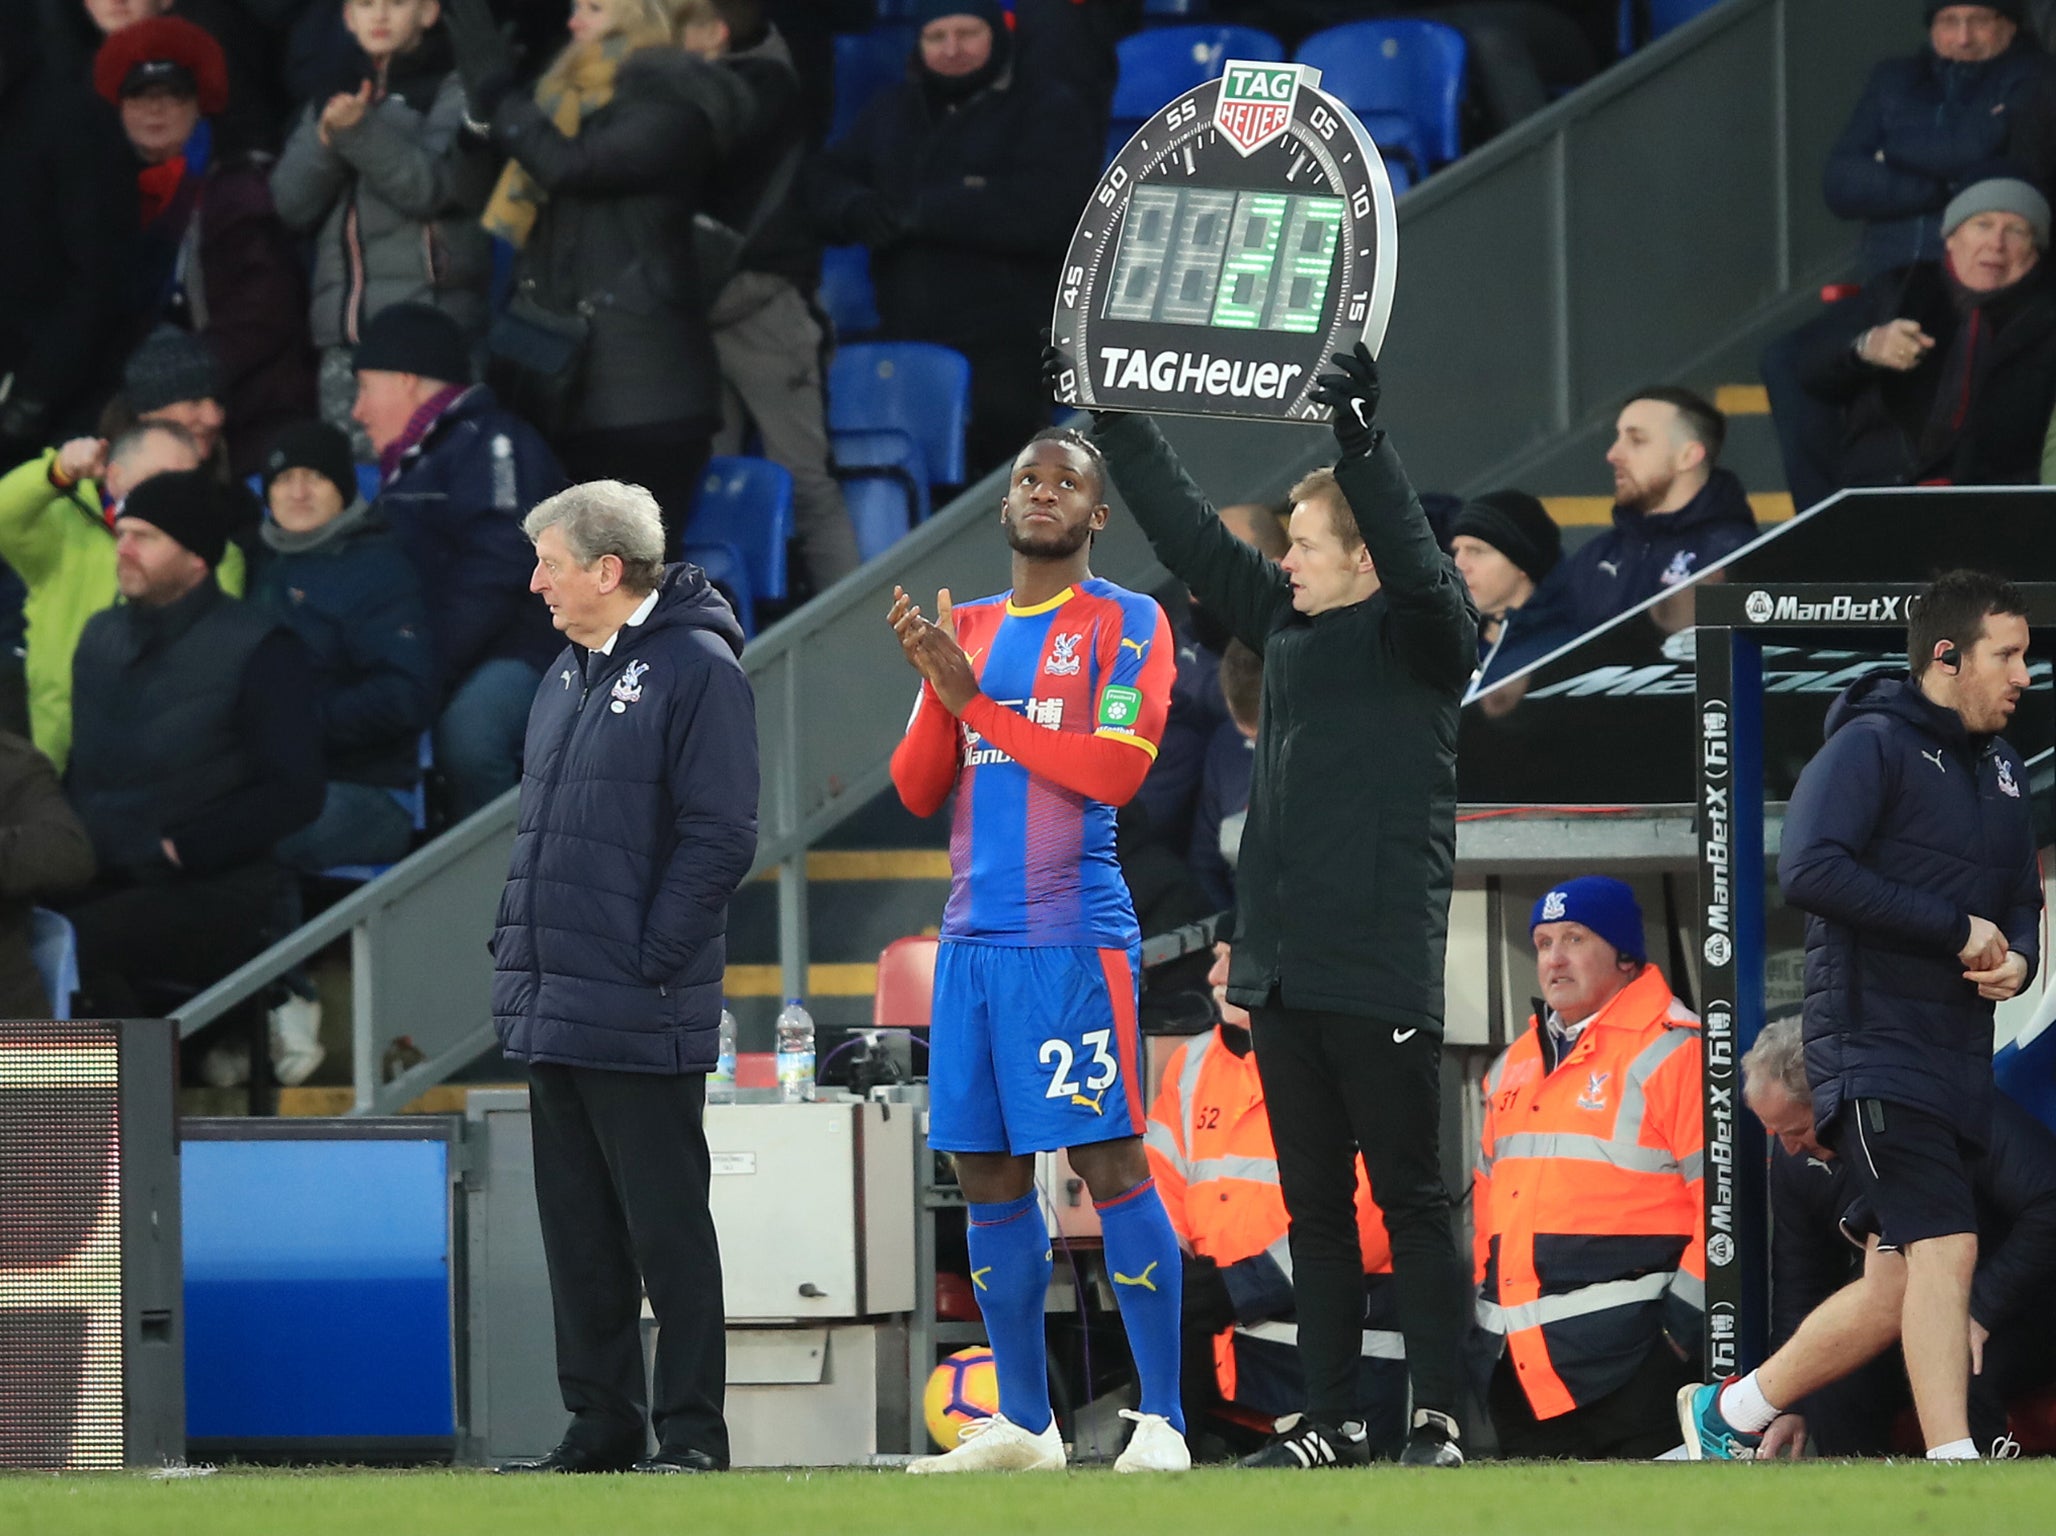 Michy Batshuayi came on for his Palace debut